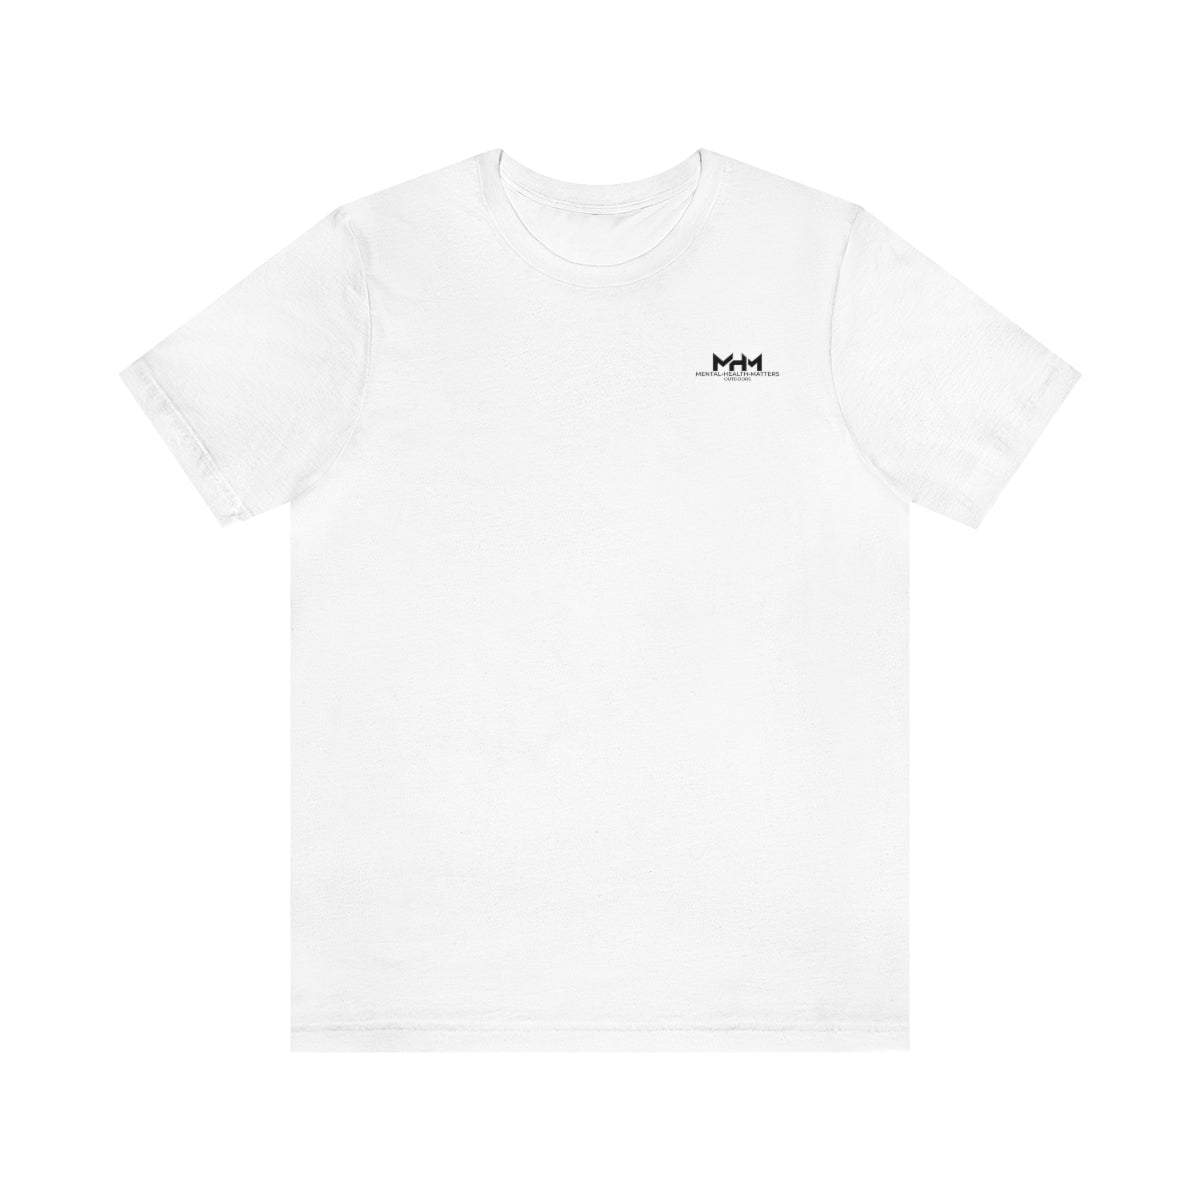 MHM Graffiti Tee (3 Colors Available)